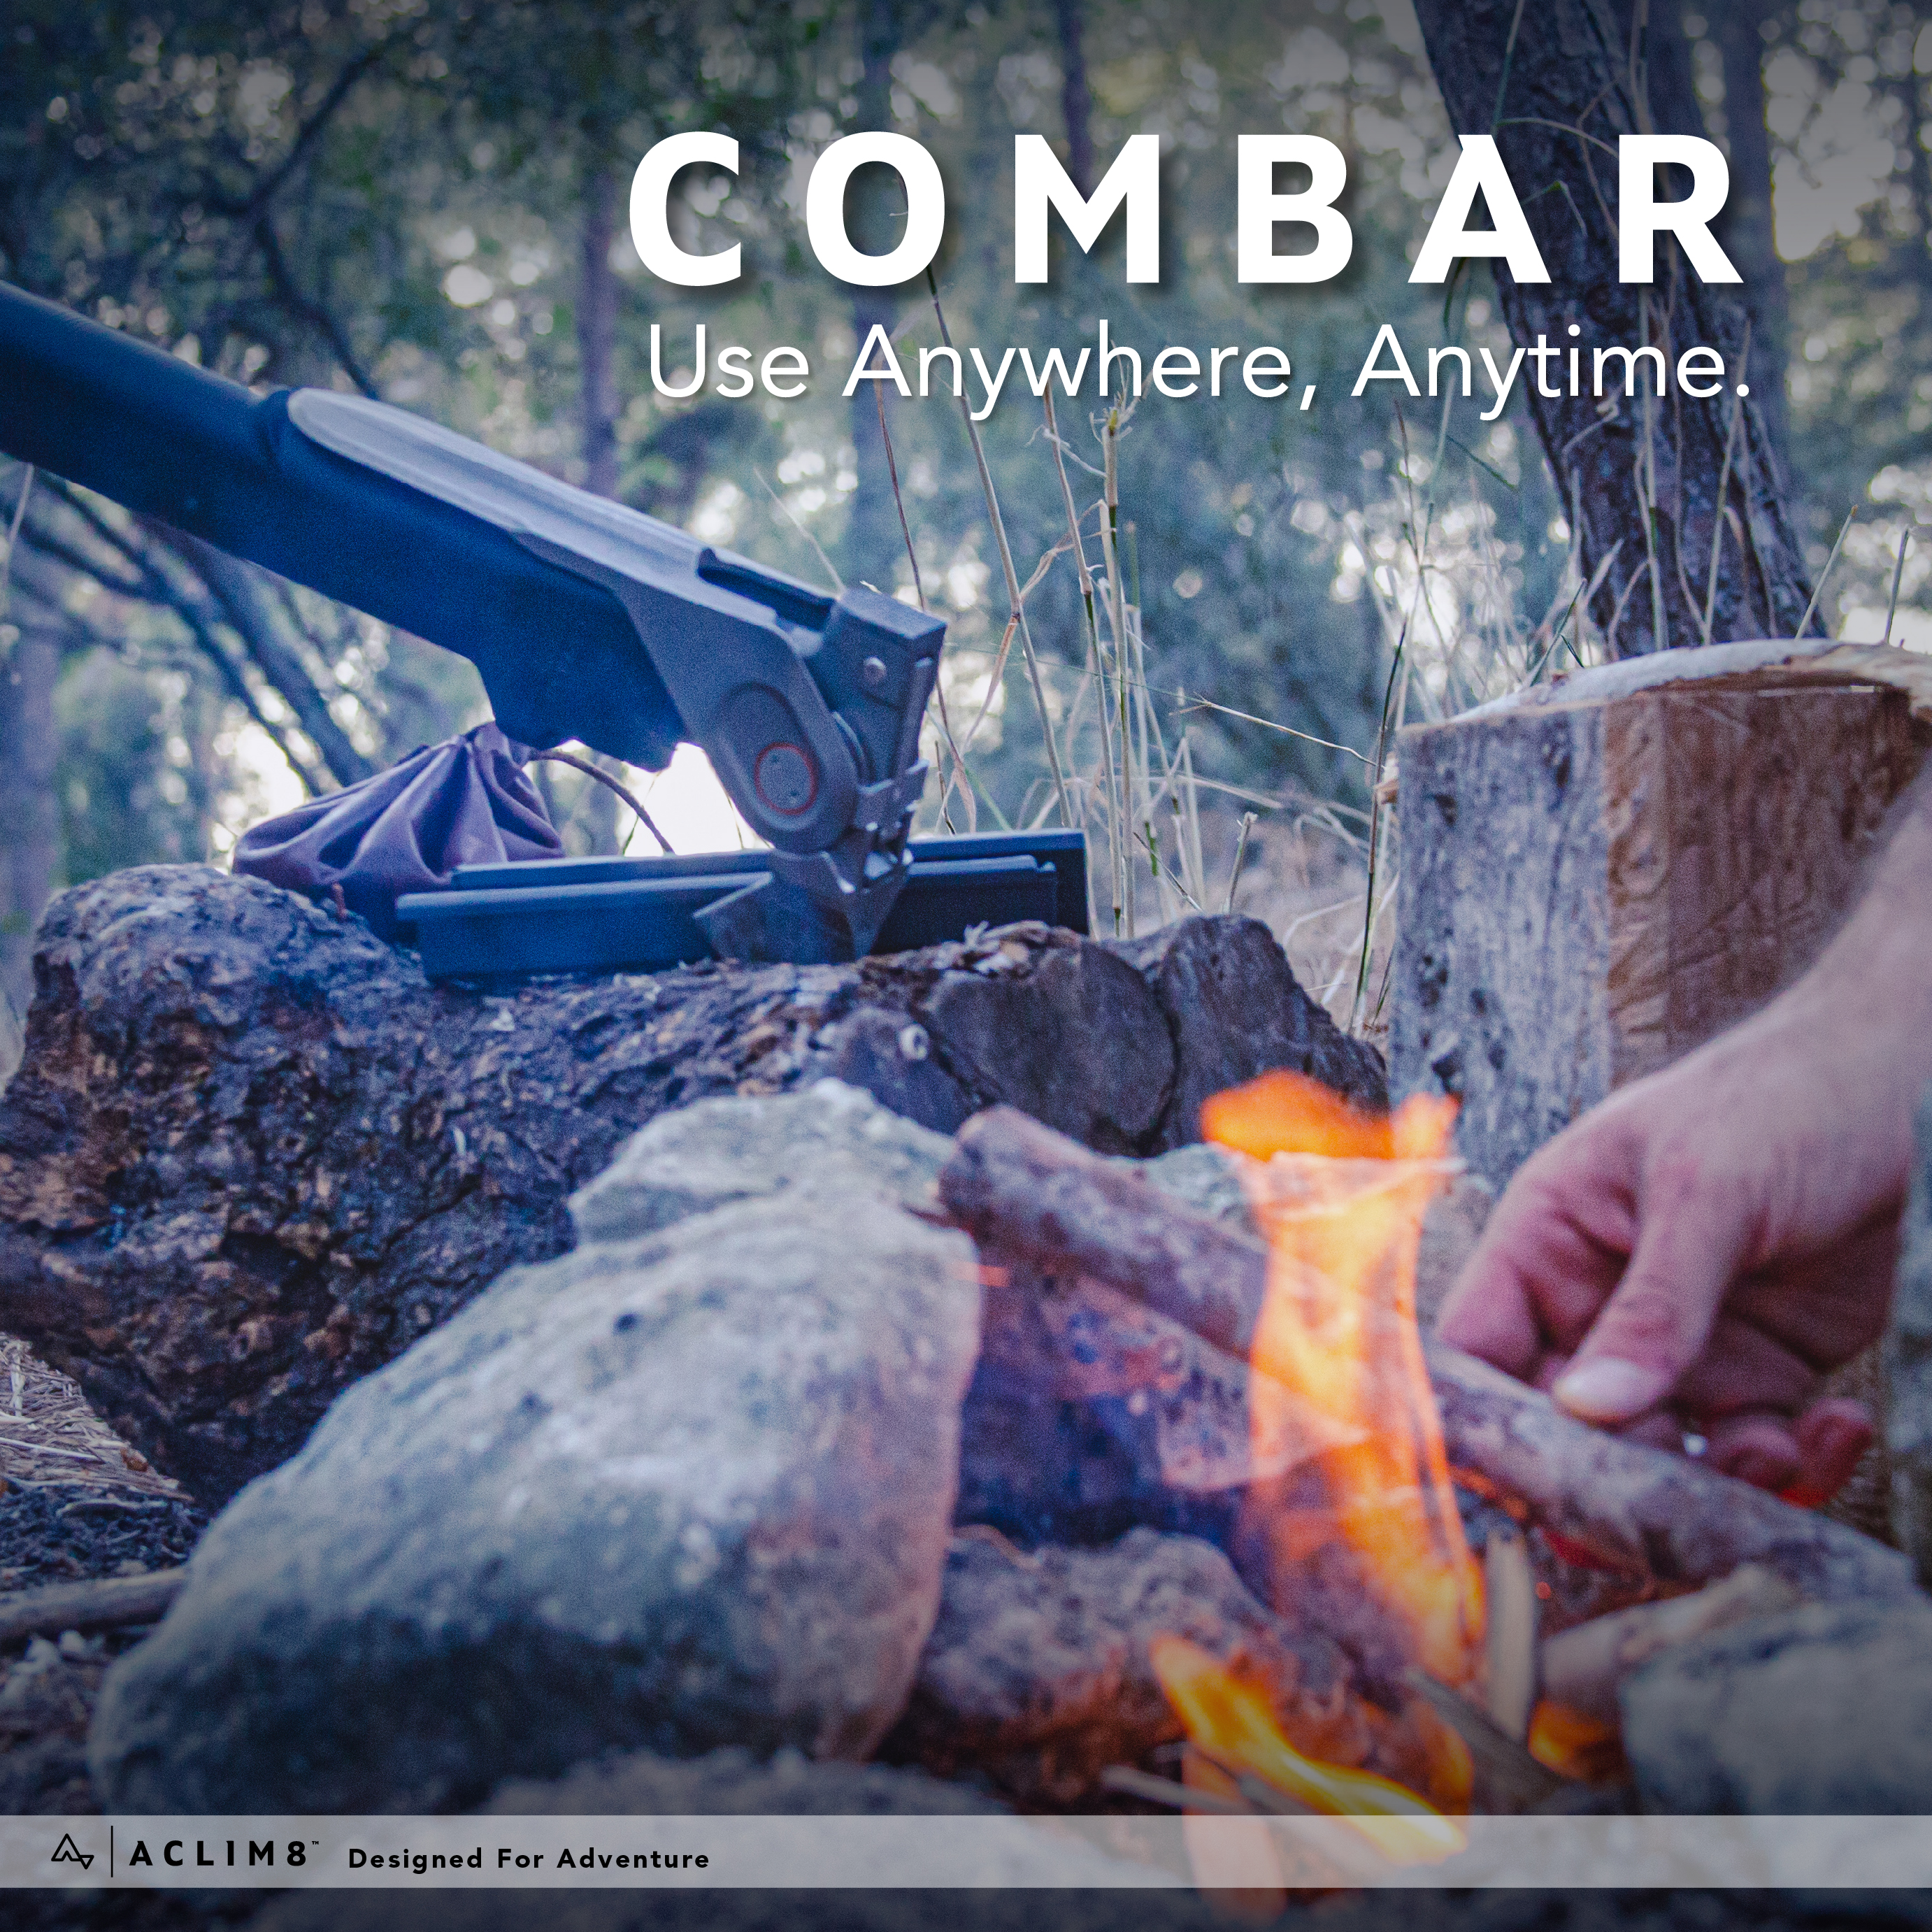 COMBAR - All-In-One Survival Tool